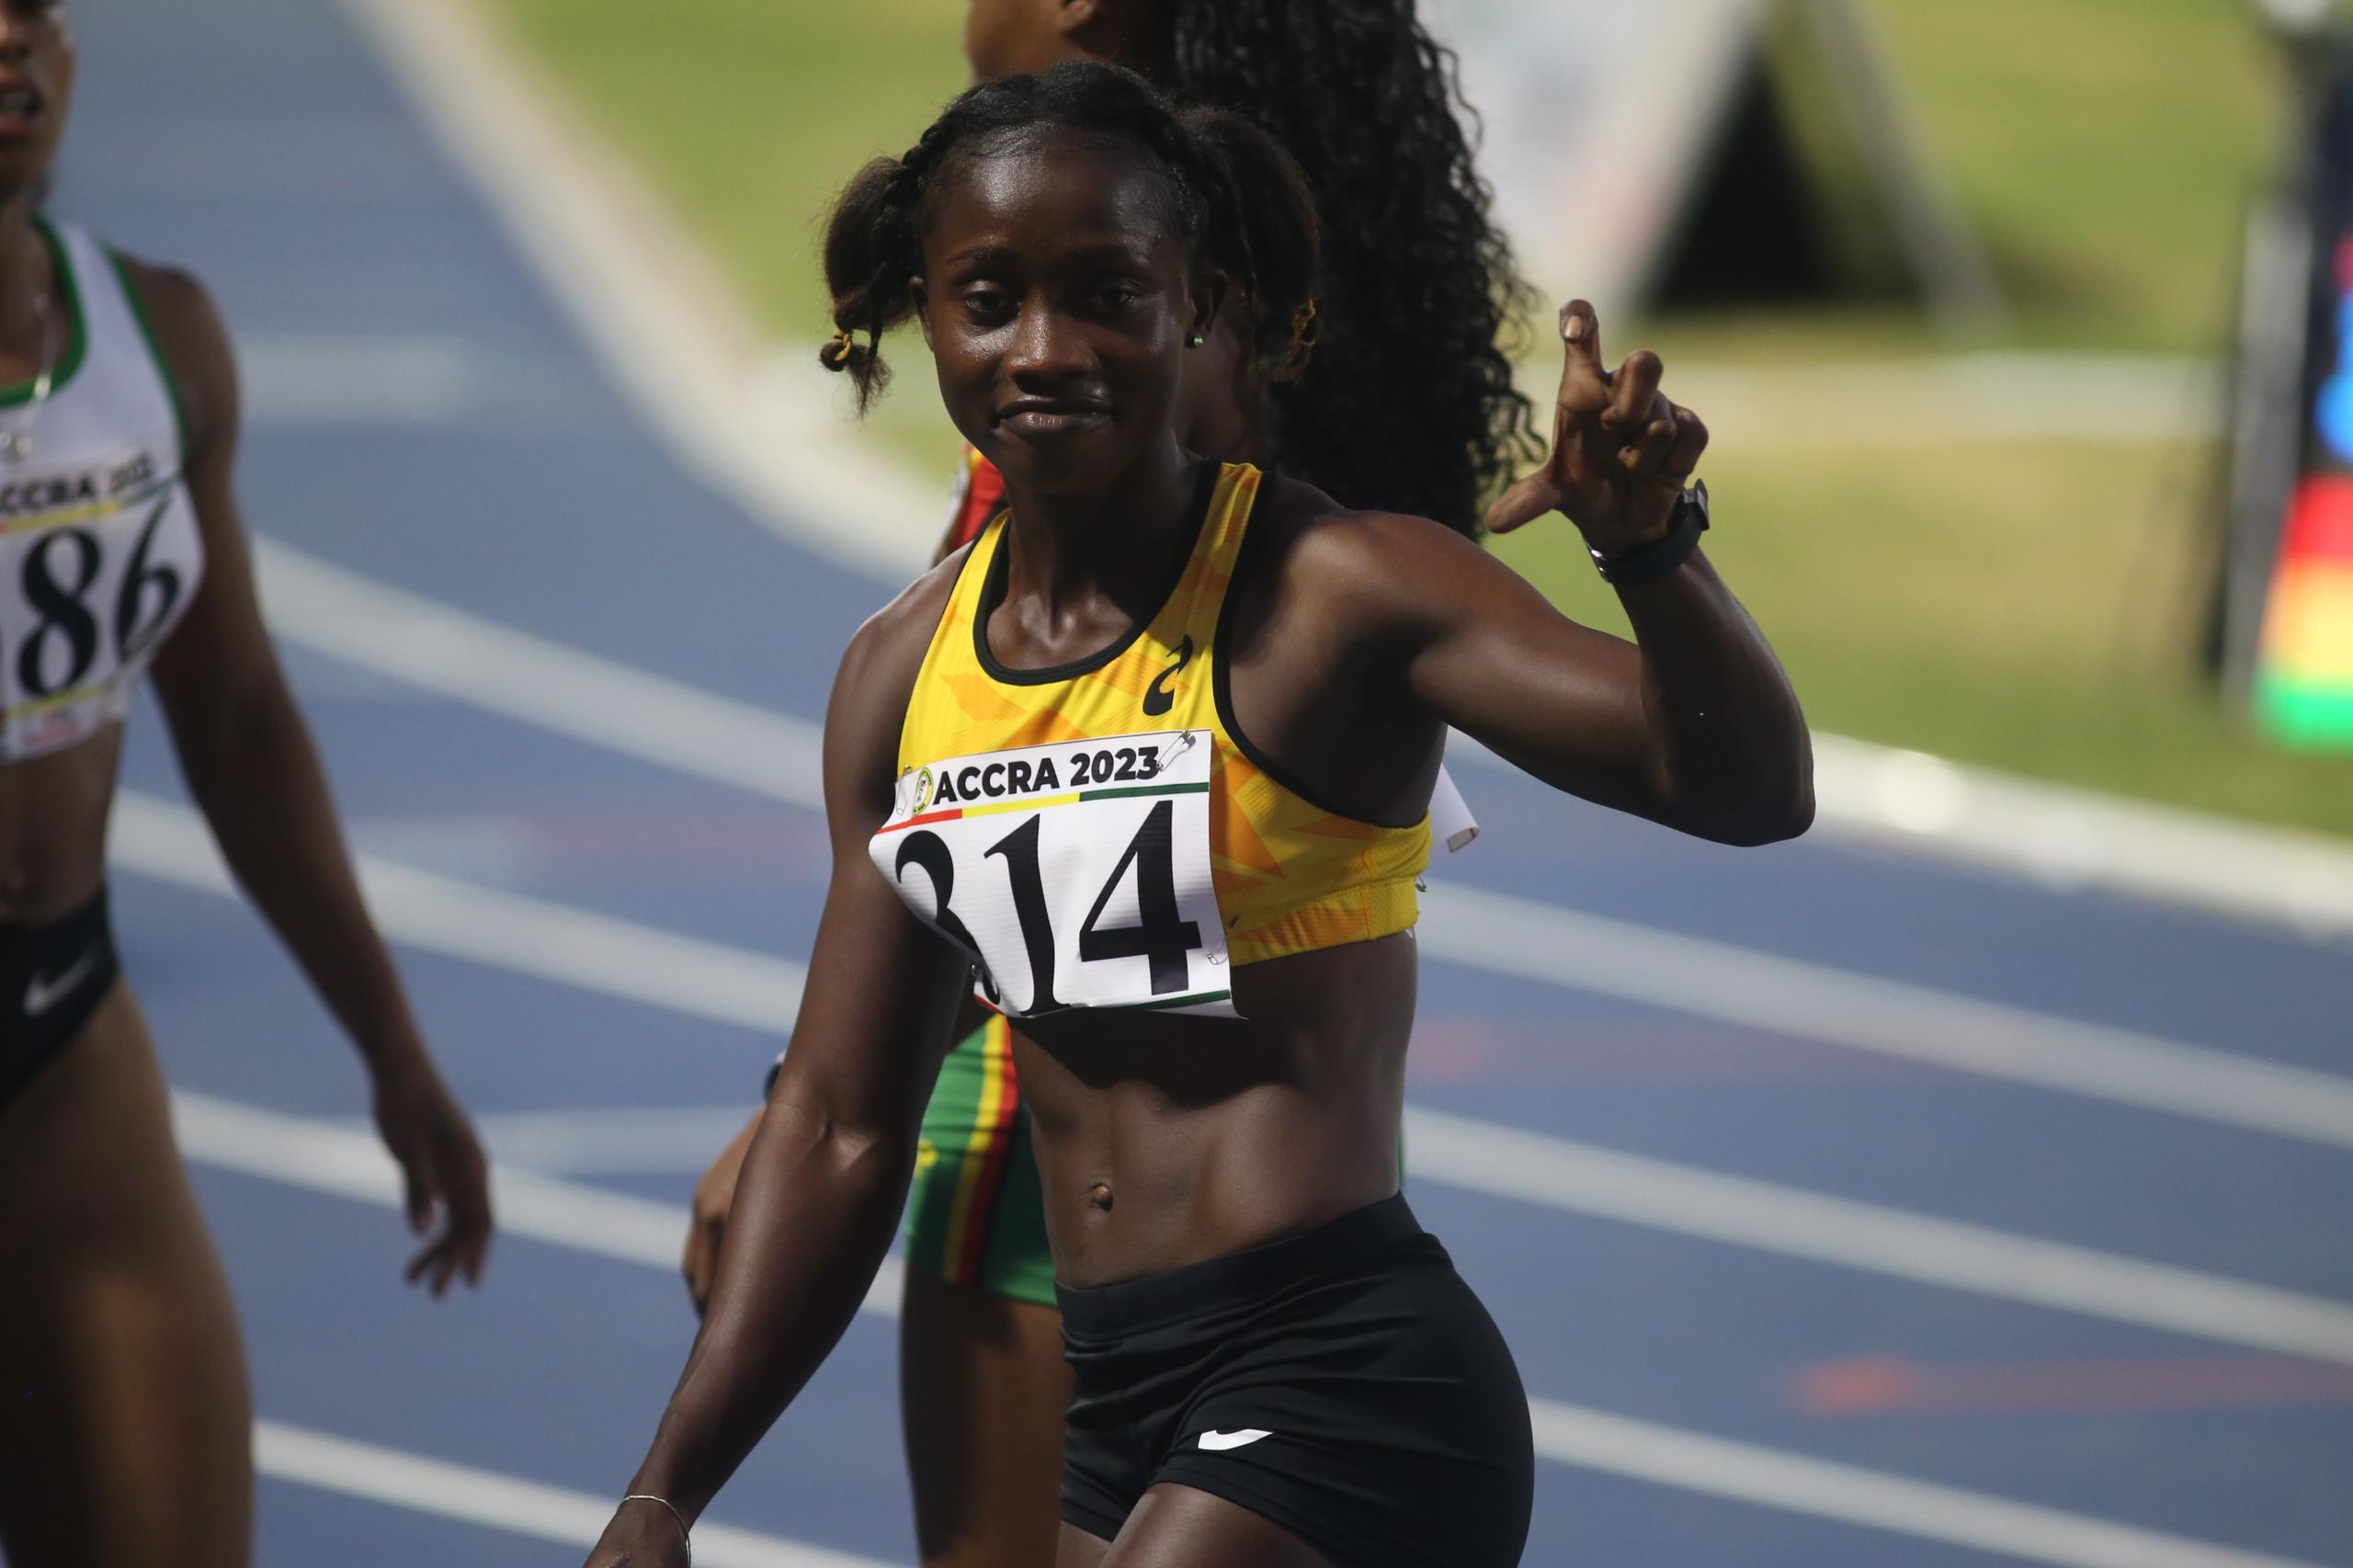 Accra 2023: Explaining Team Ghana’s chance in winning double gold in 4x100m relay